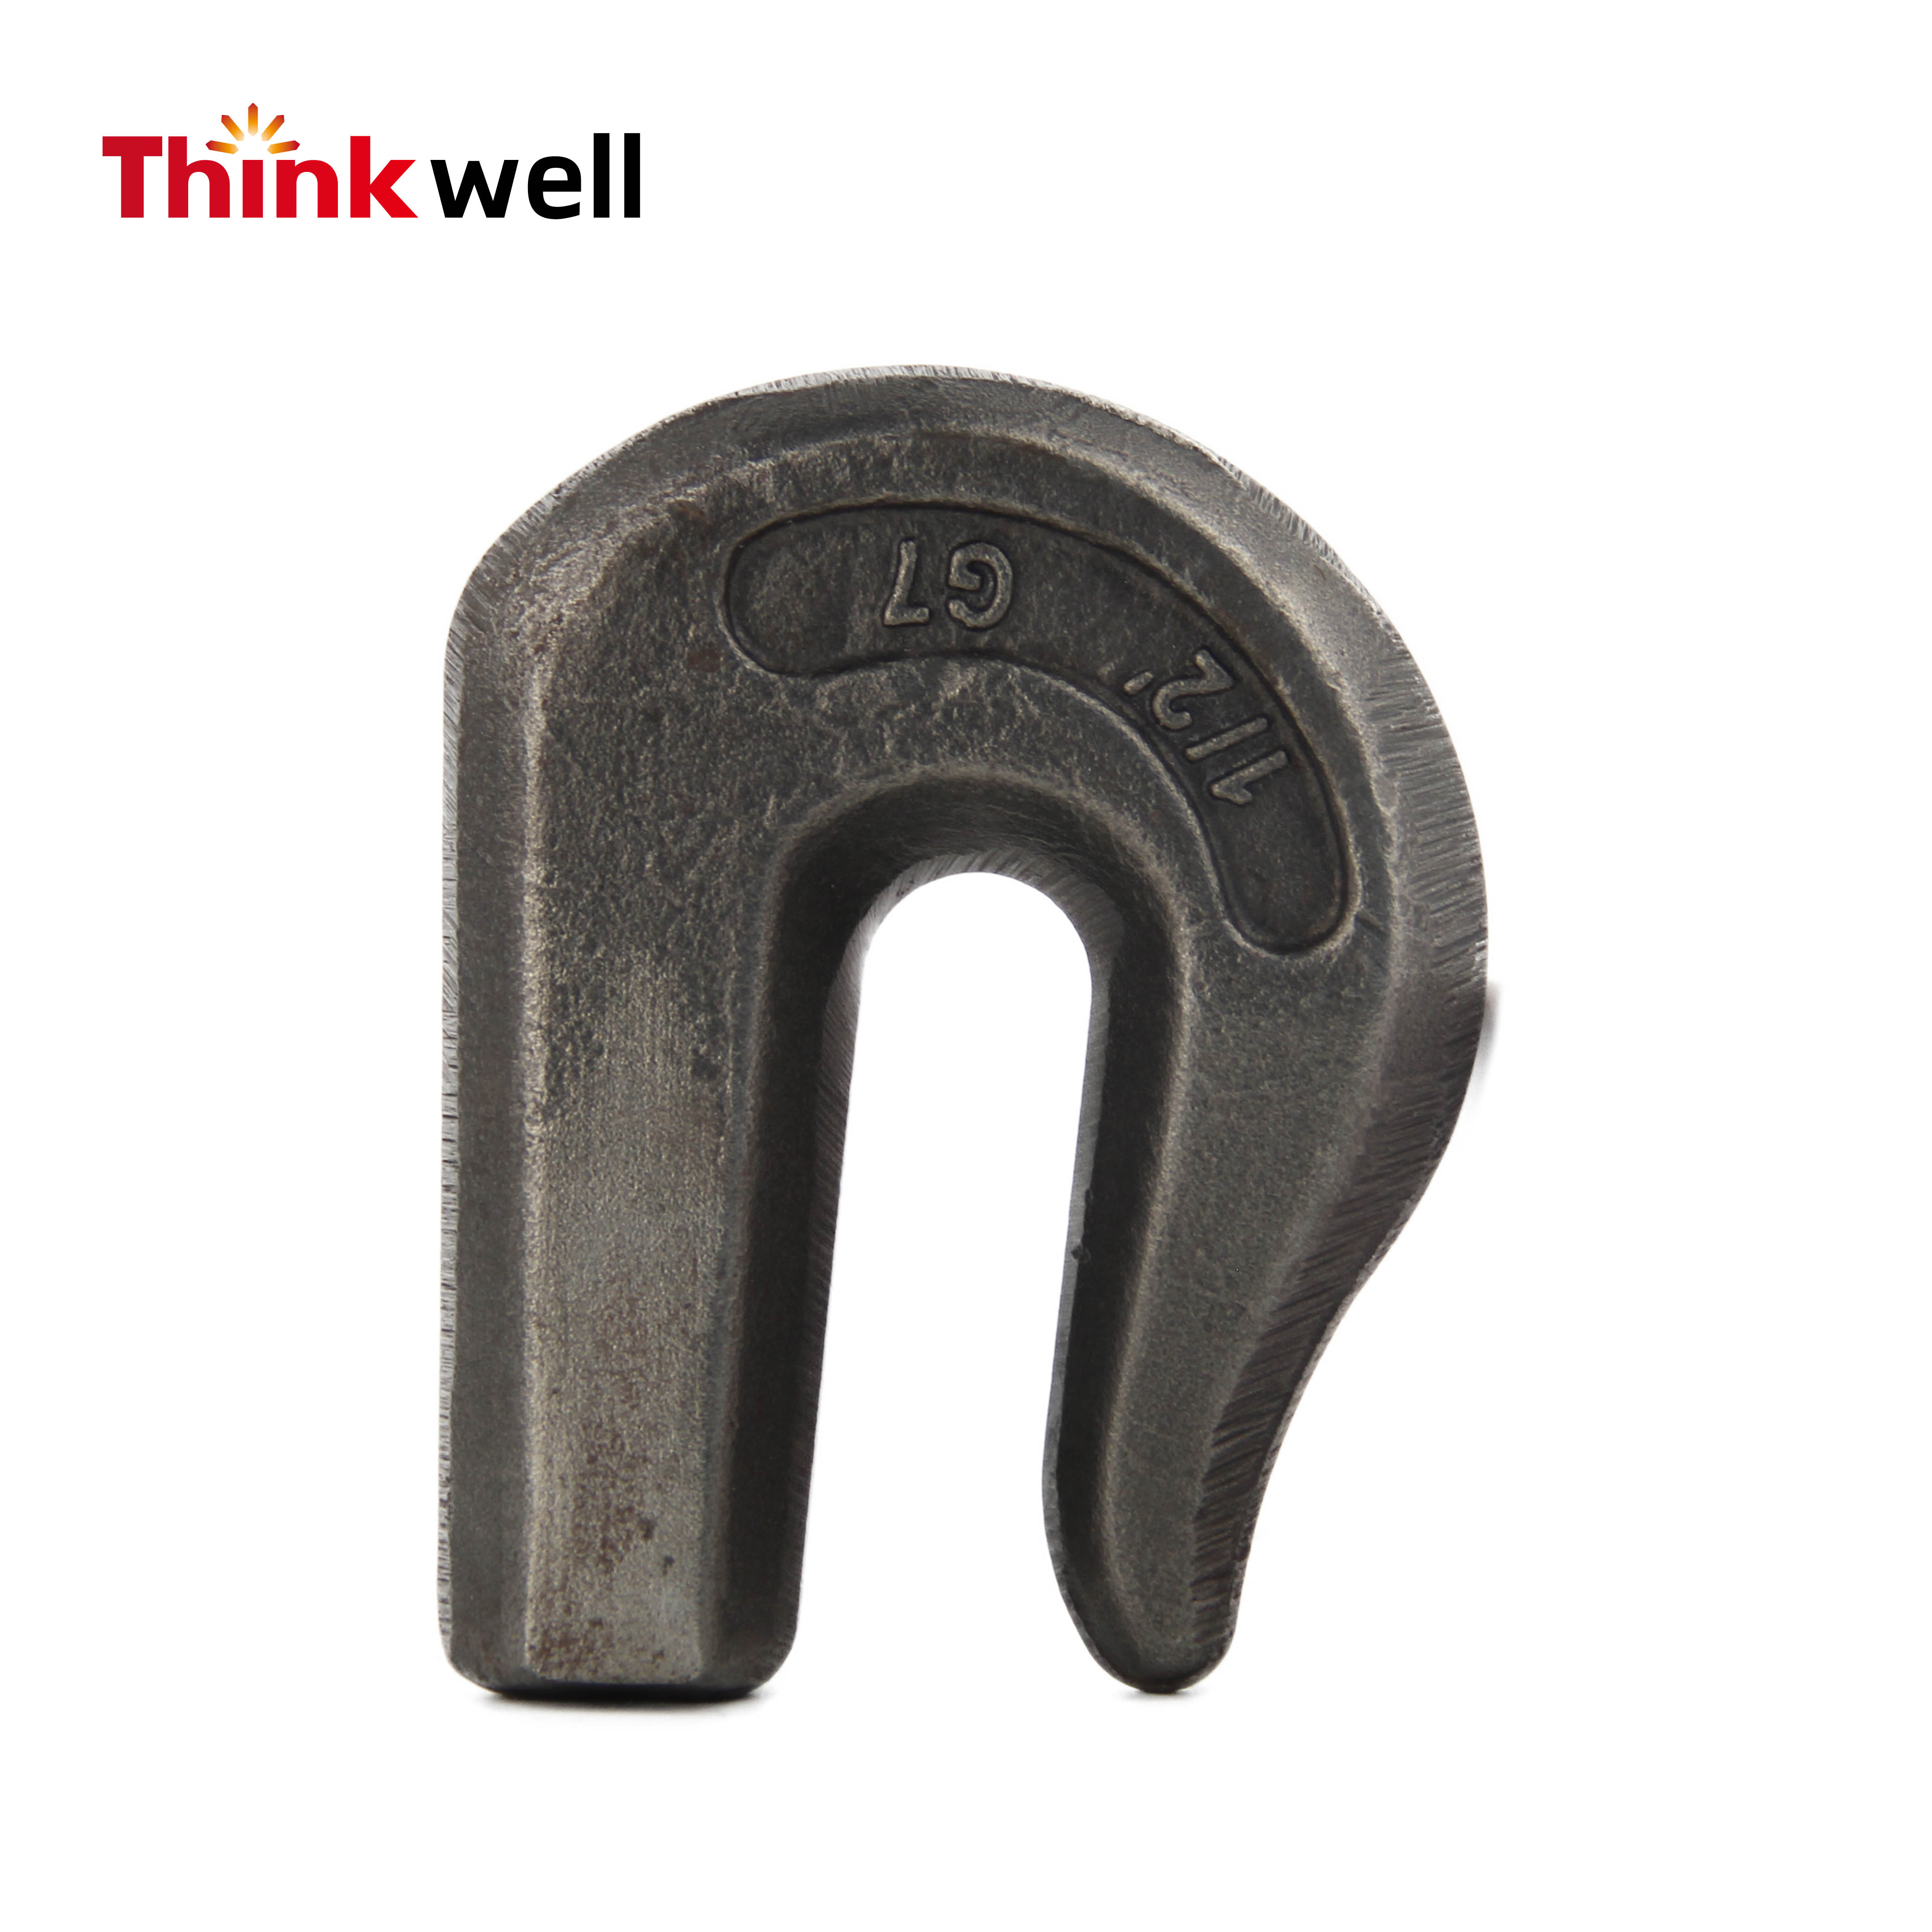 Rigging Hardware Lifting Accessories Weld on Grab Hook